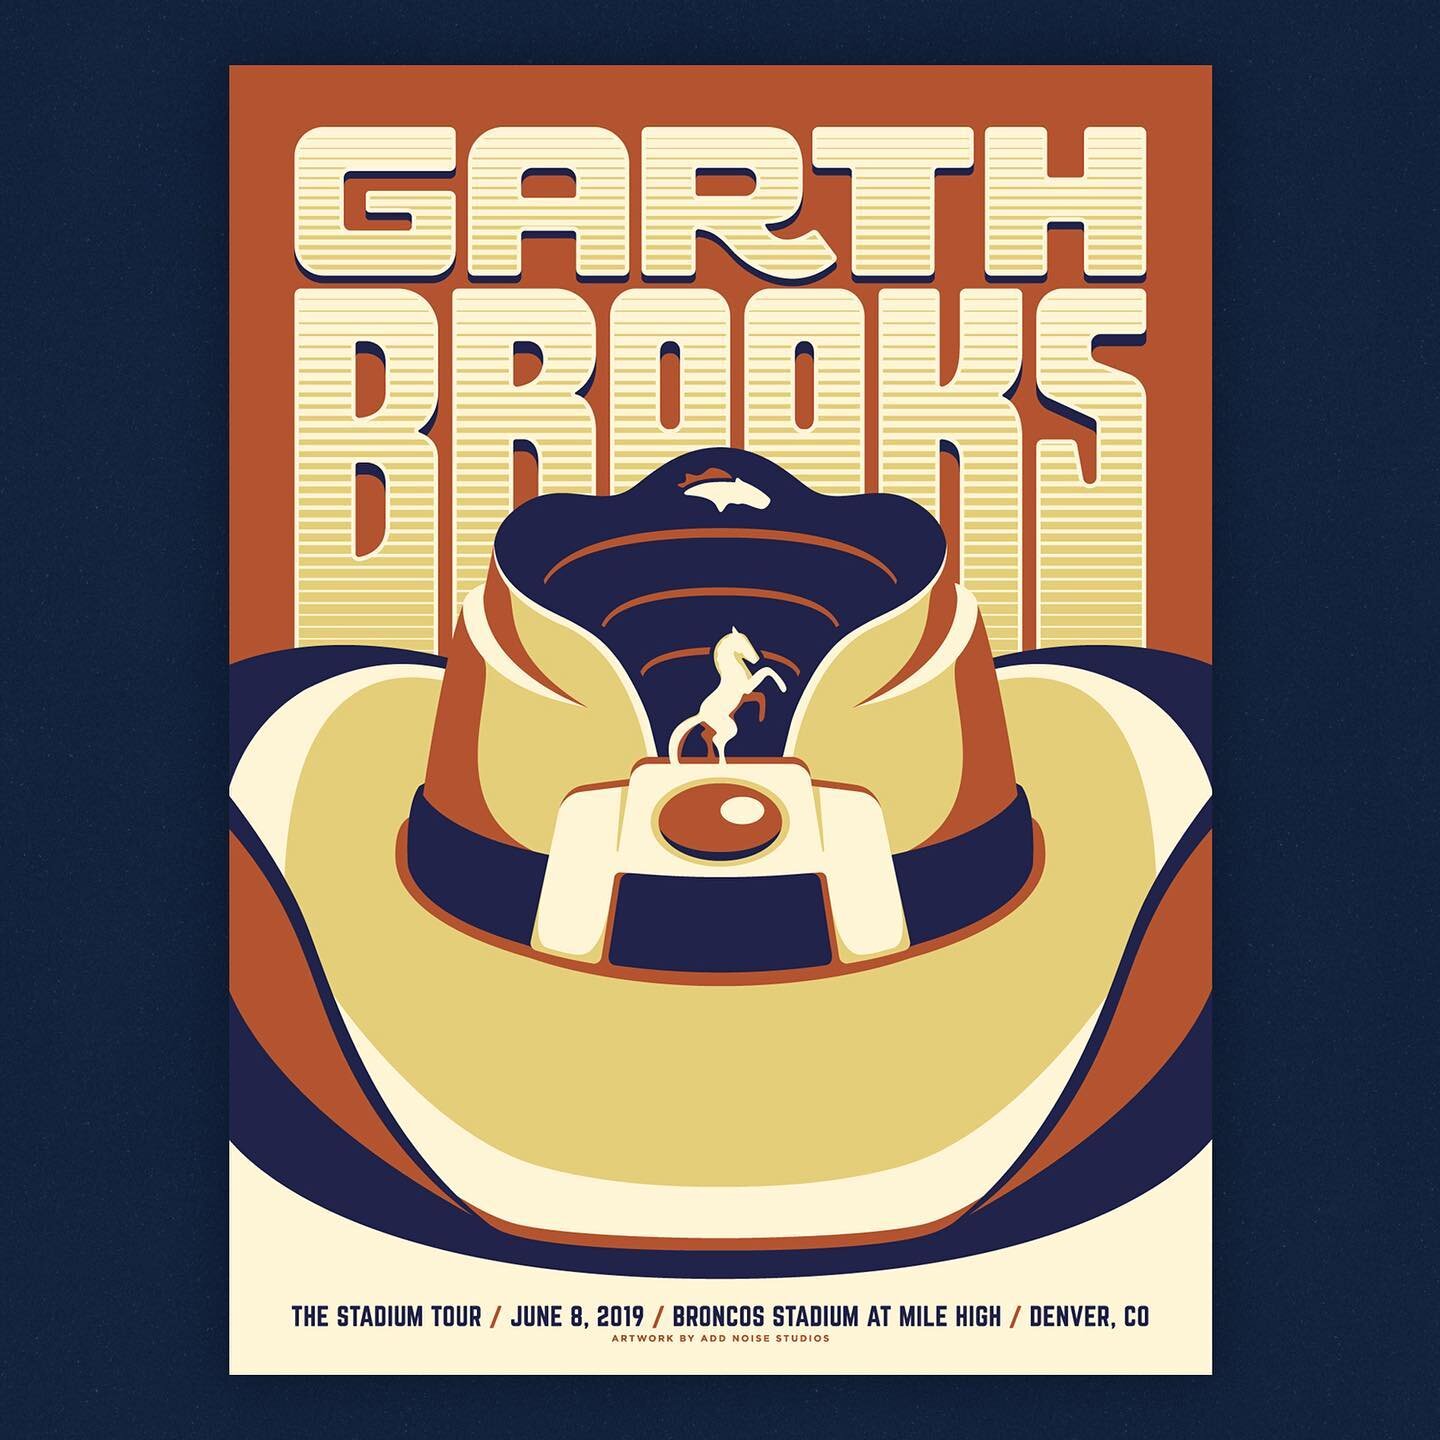 #tbt A couple years back I was commissioned to create a poster as a gift for @garthbrooks when he came to perform at Broncos Stadium. Mr. Brooks performed to a sold out crowd of 84,000 people and the next day said it was the best night of his career.